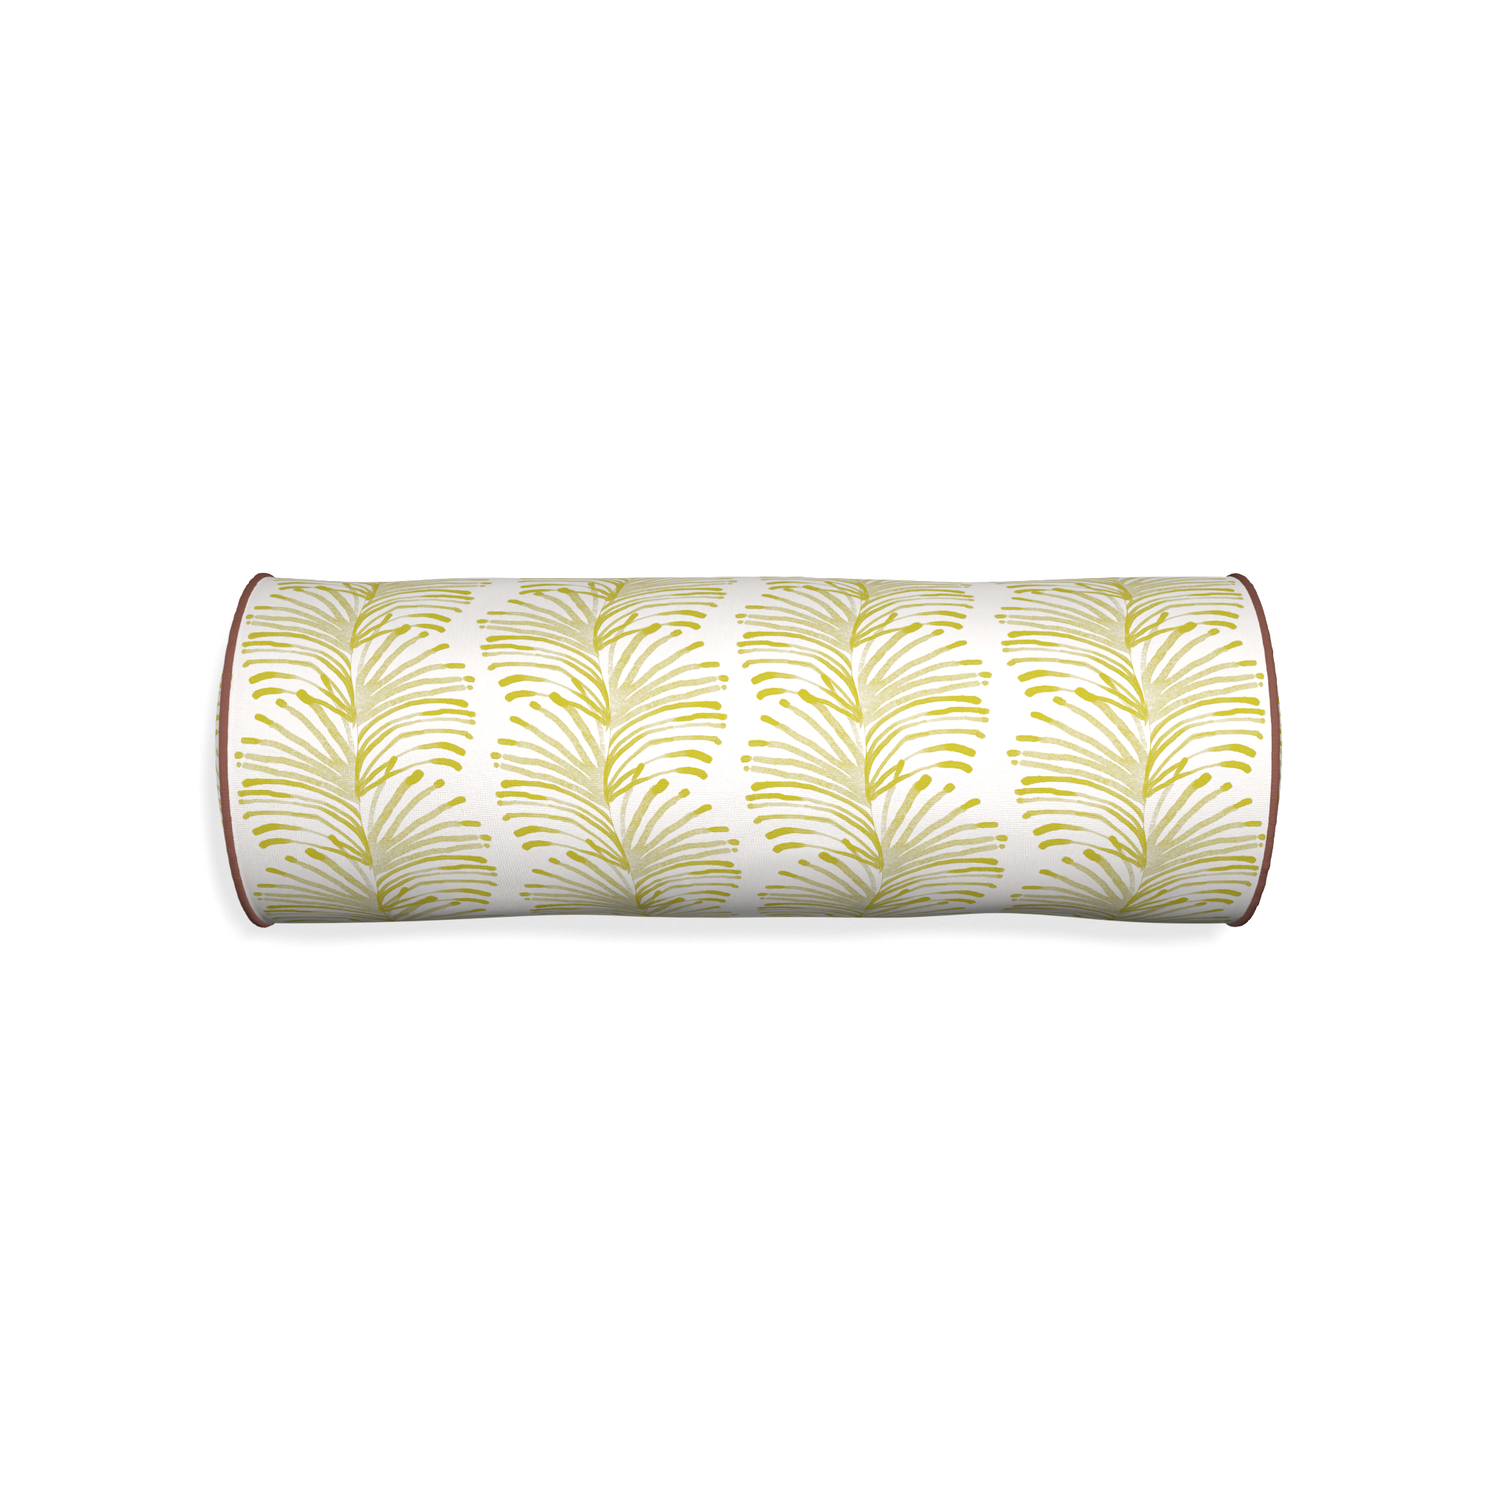 Bolster emma chartreuse custom pillow with w piping on white background